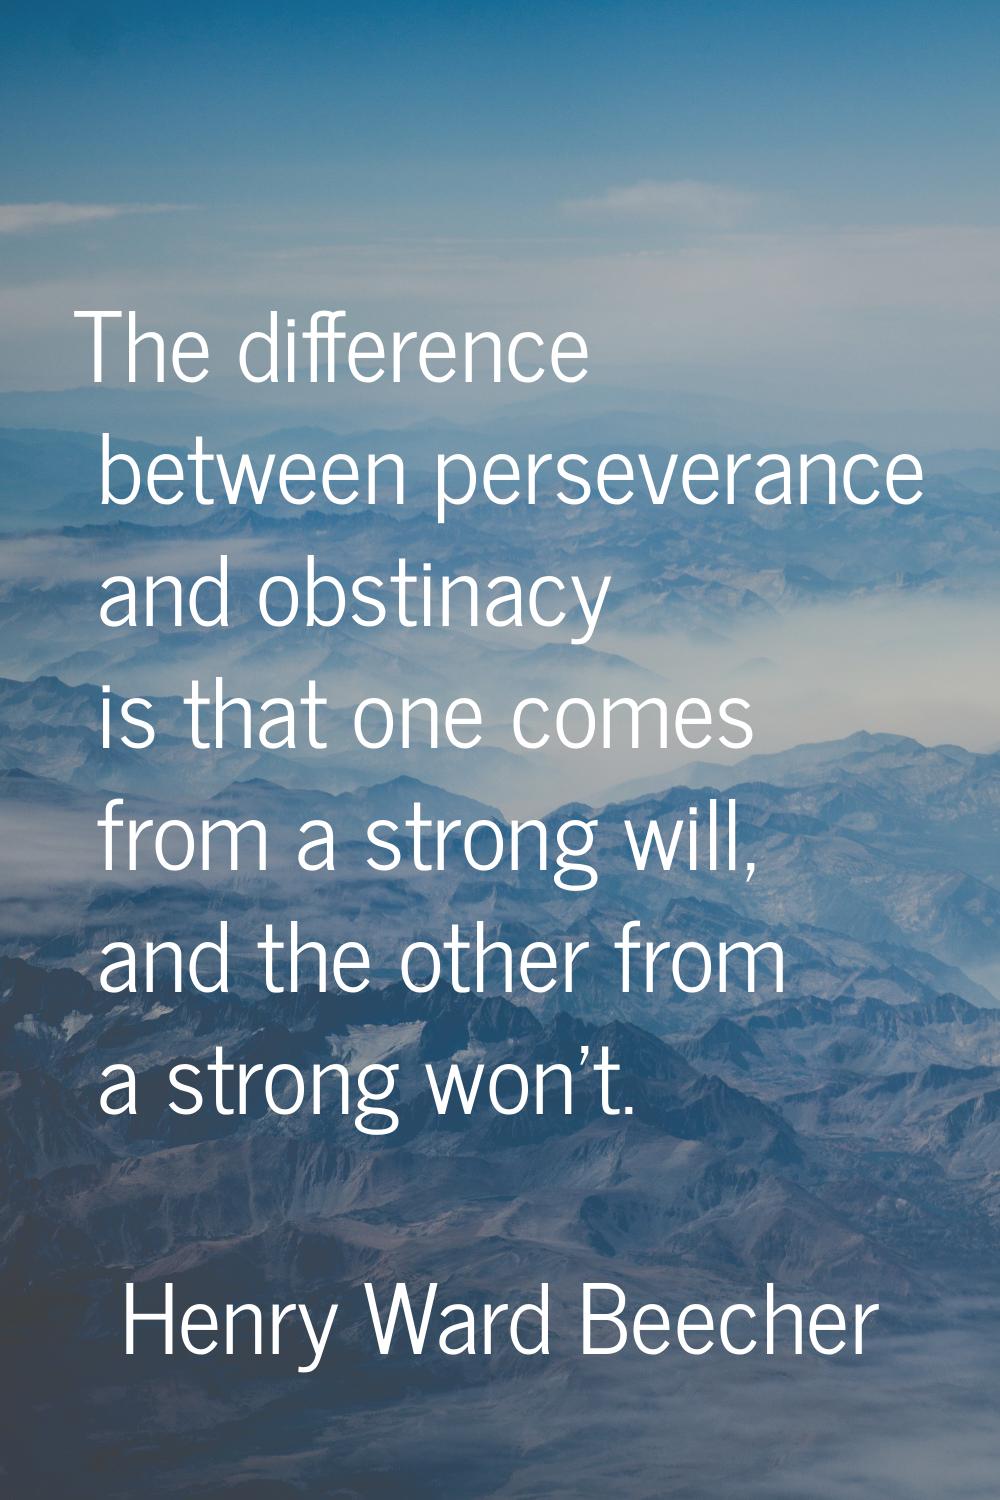 The difference between perseverance and obstinacy is that one comes from a strong will, and the oth